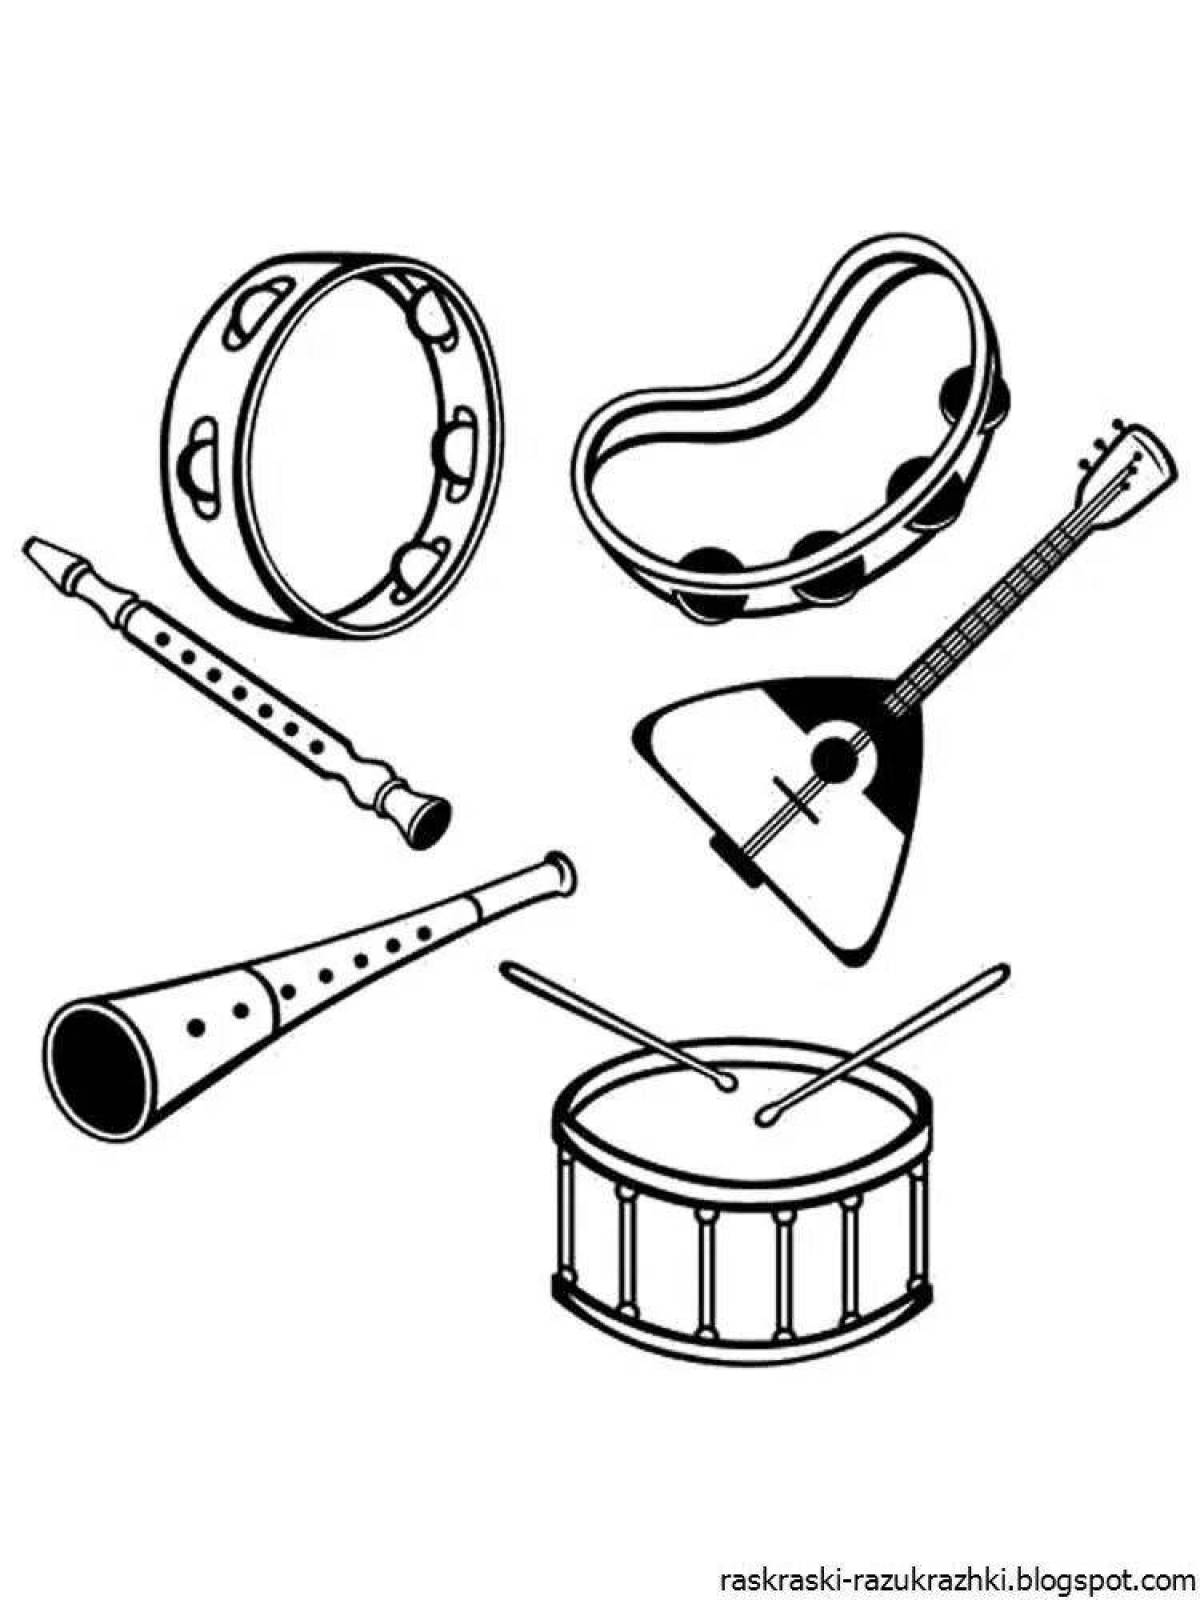 Coloring page amazing russian folk musical instruments